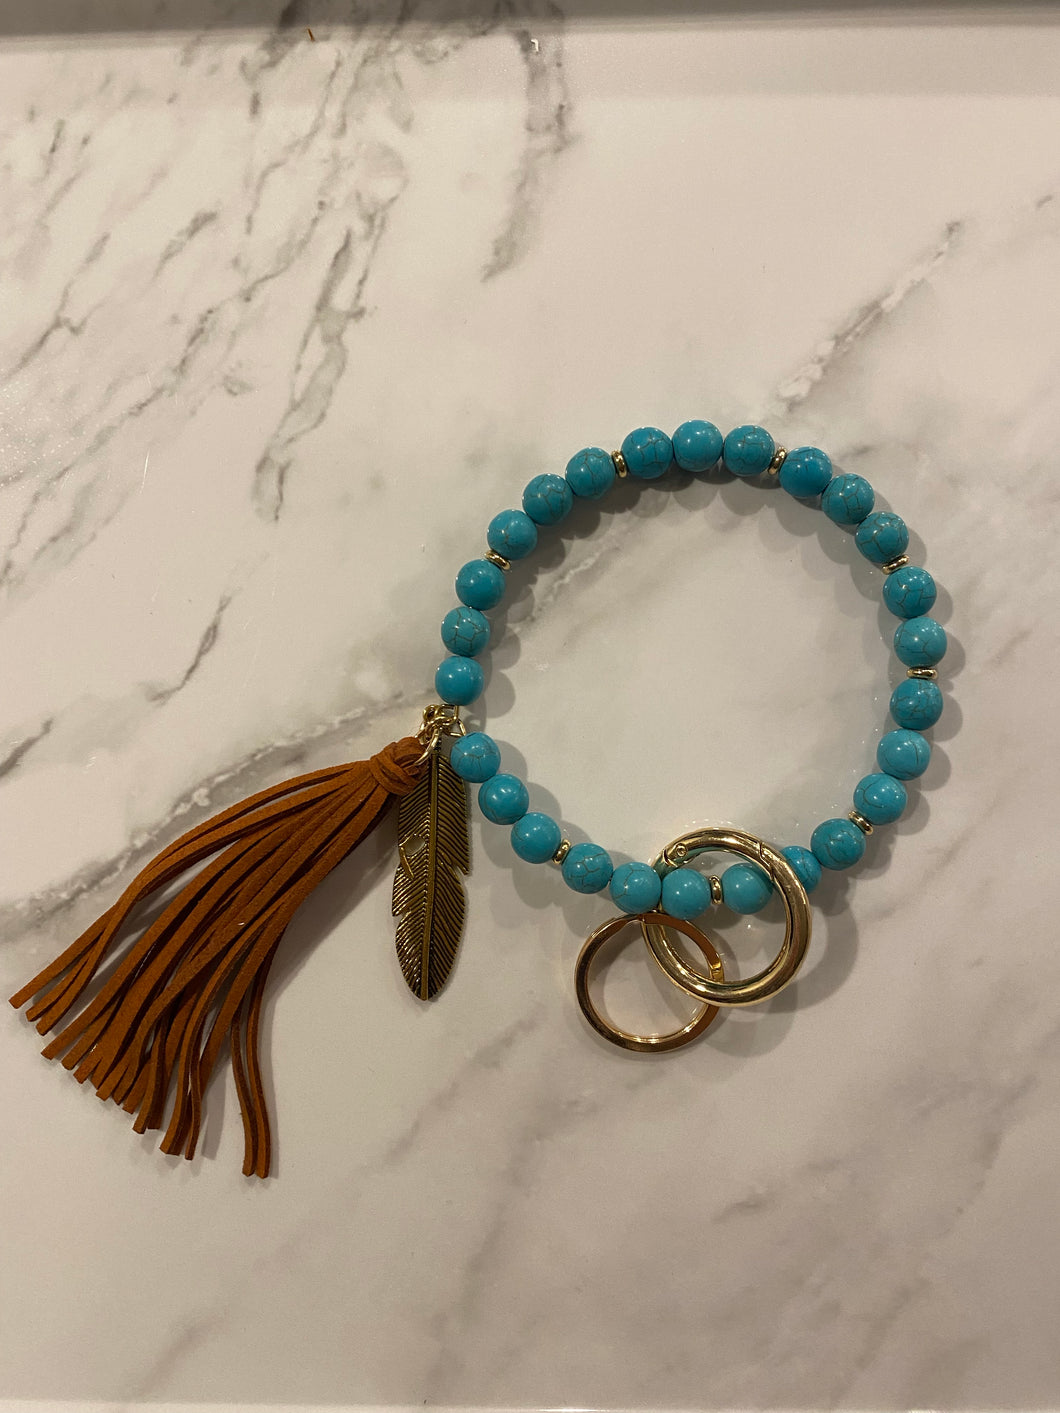 Bangle with cognac tassel and feather charm